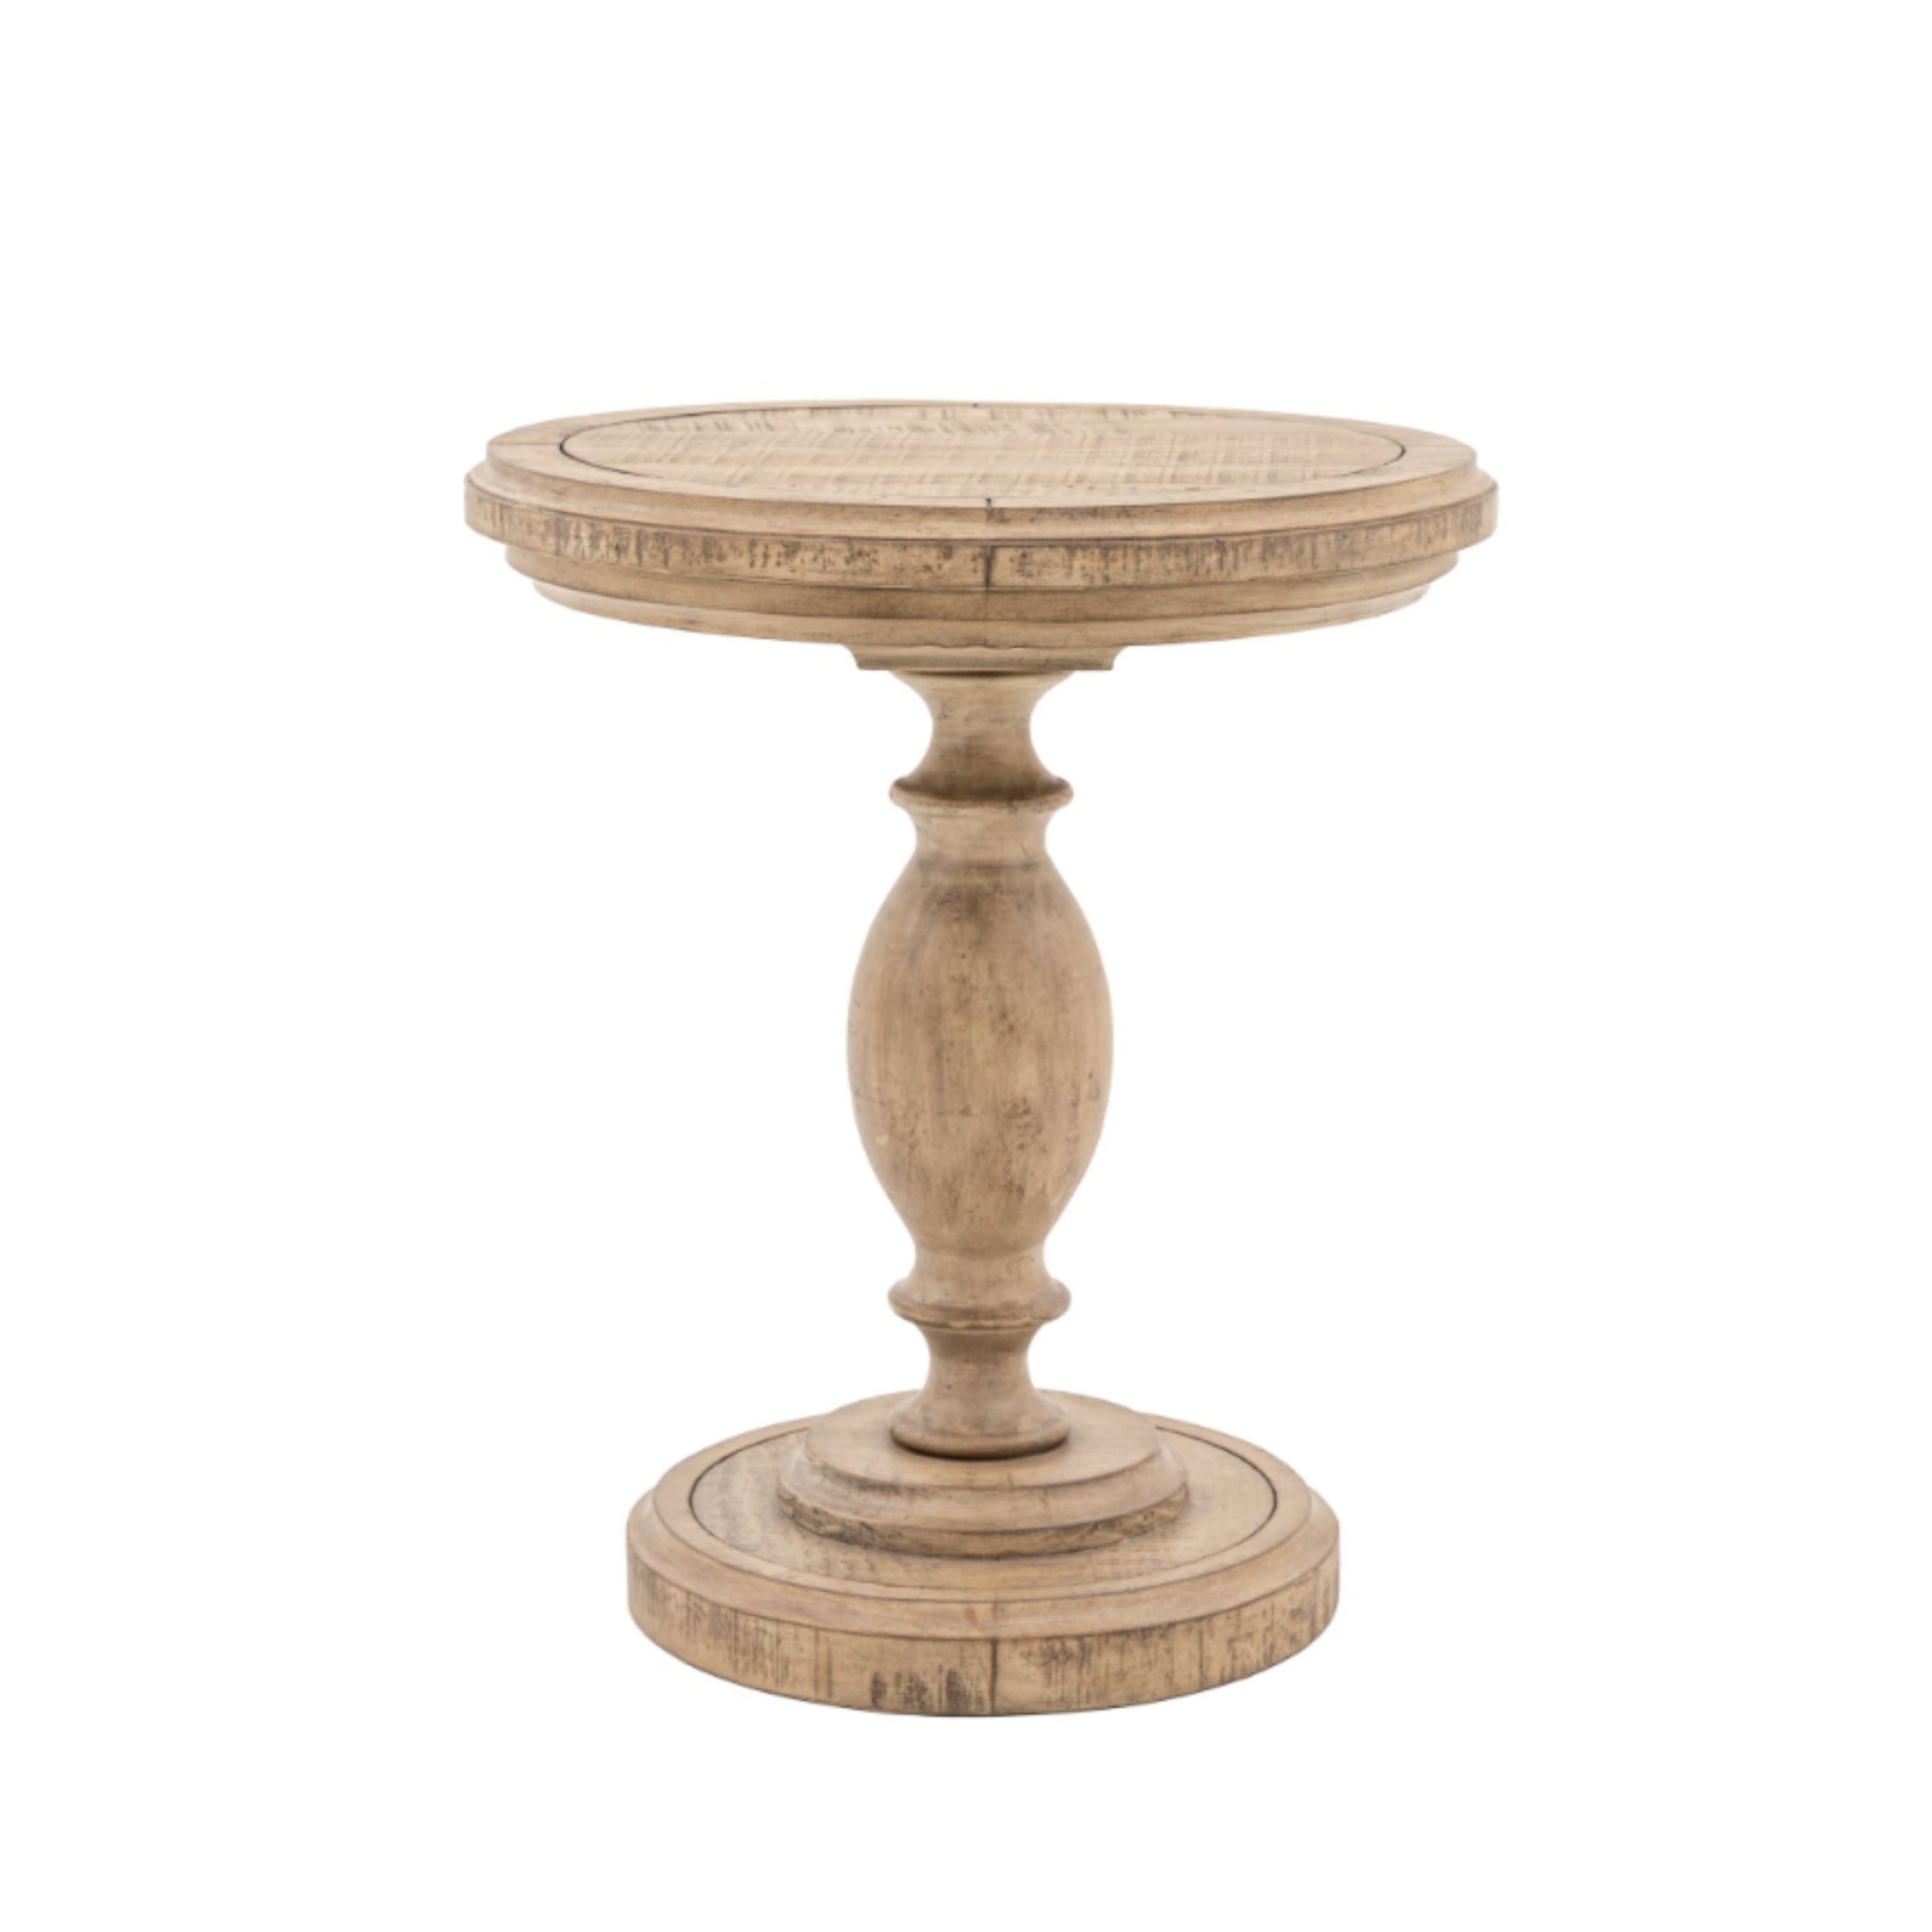 Rustic American Pine Round Side Table